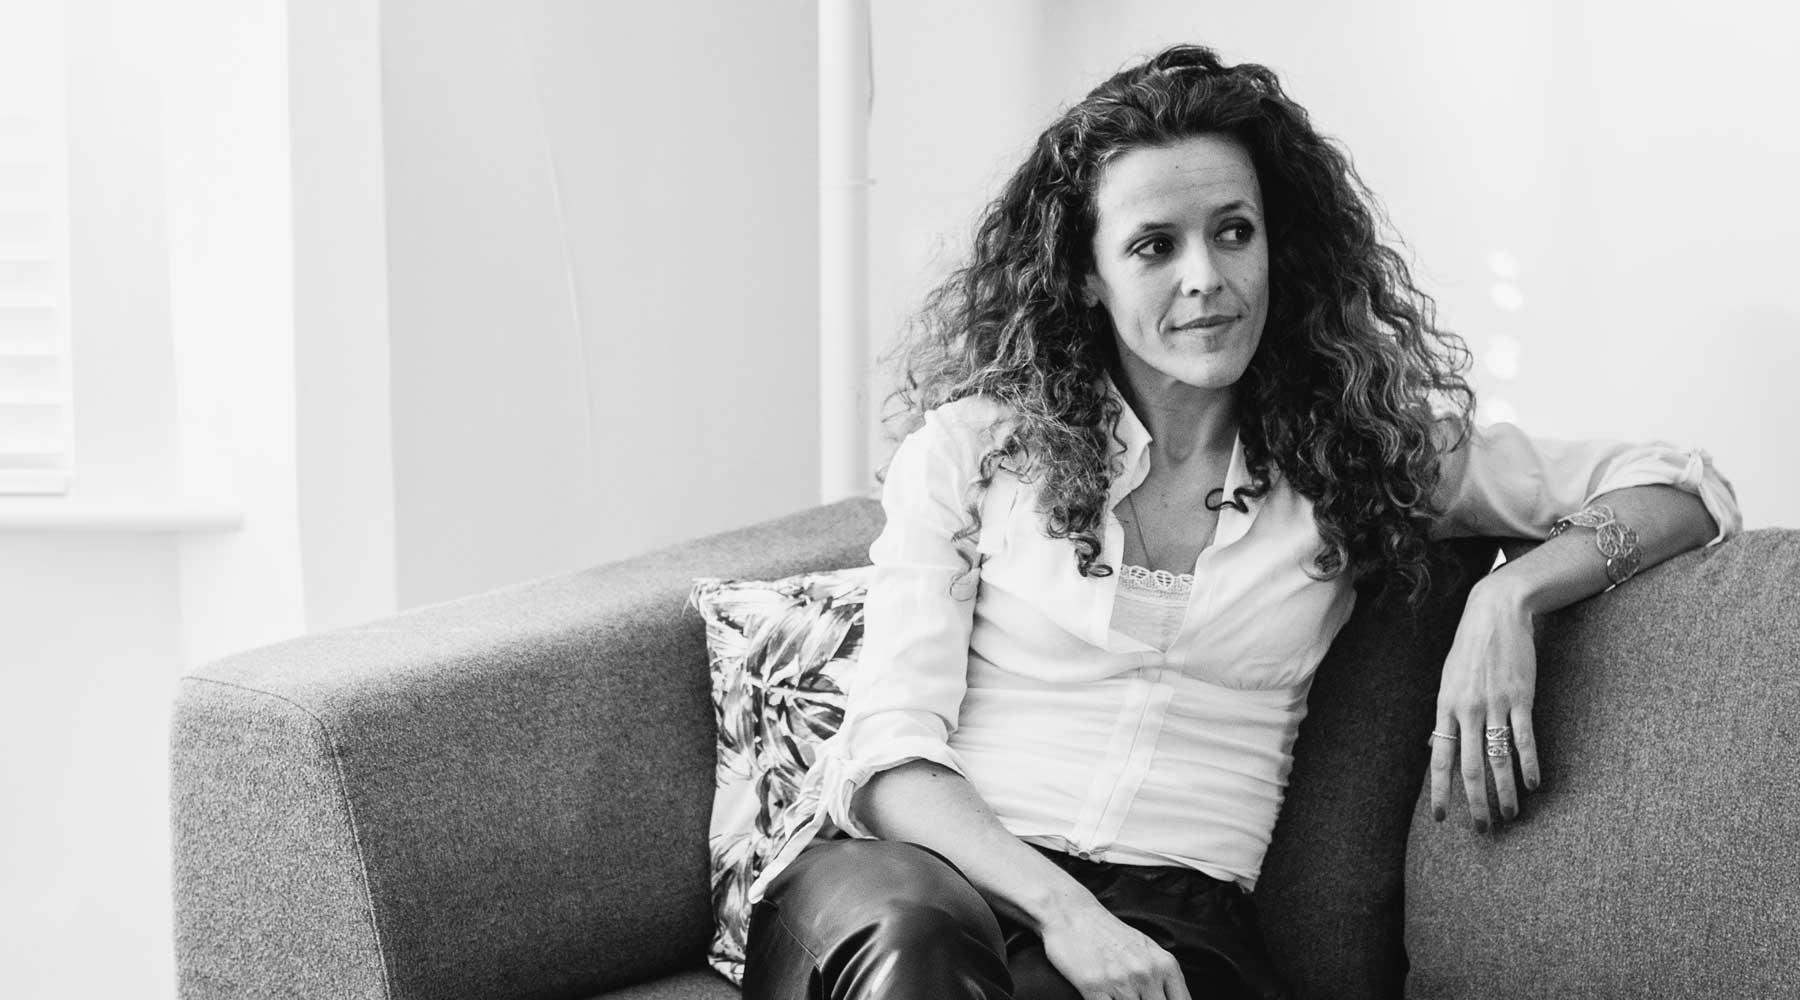 Black and white portrait of award-winning bespoke jewellery designer Arabel Lebrusan. Sitting on a sofa, she wears a white button-down shirt, dark leather trousers, and looks off to the left